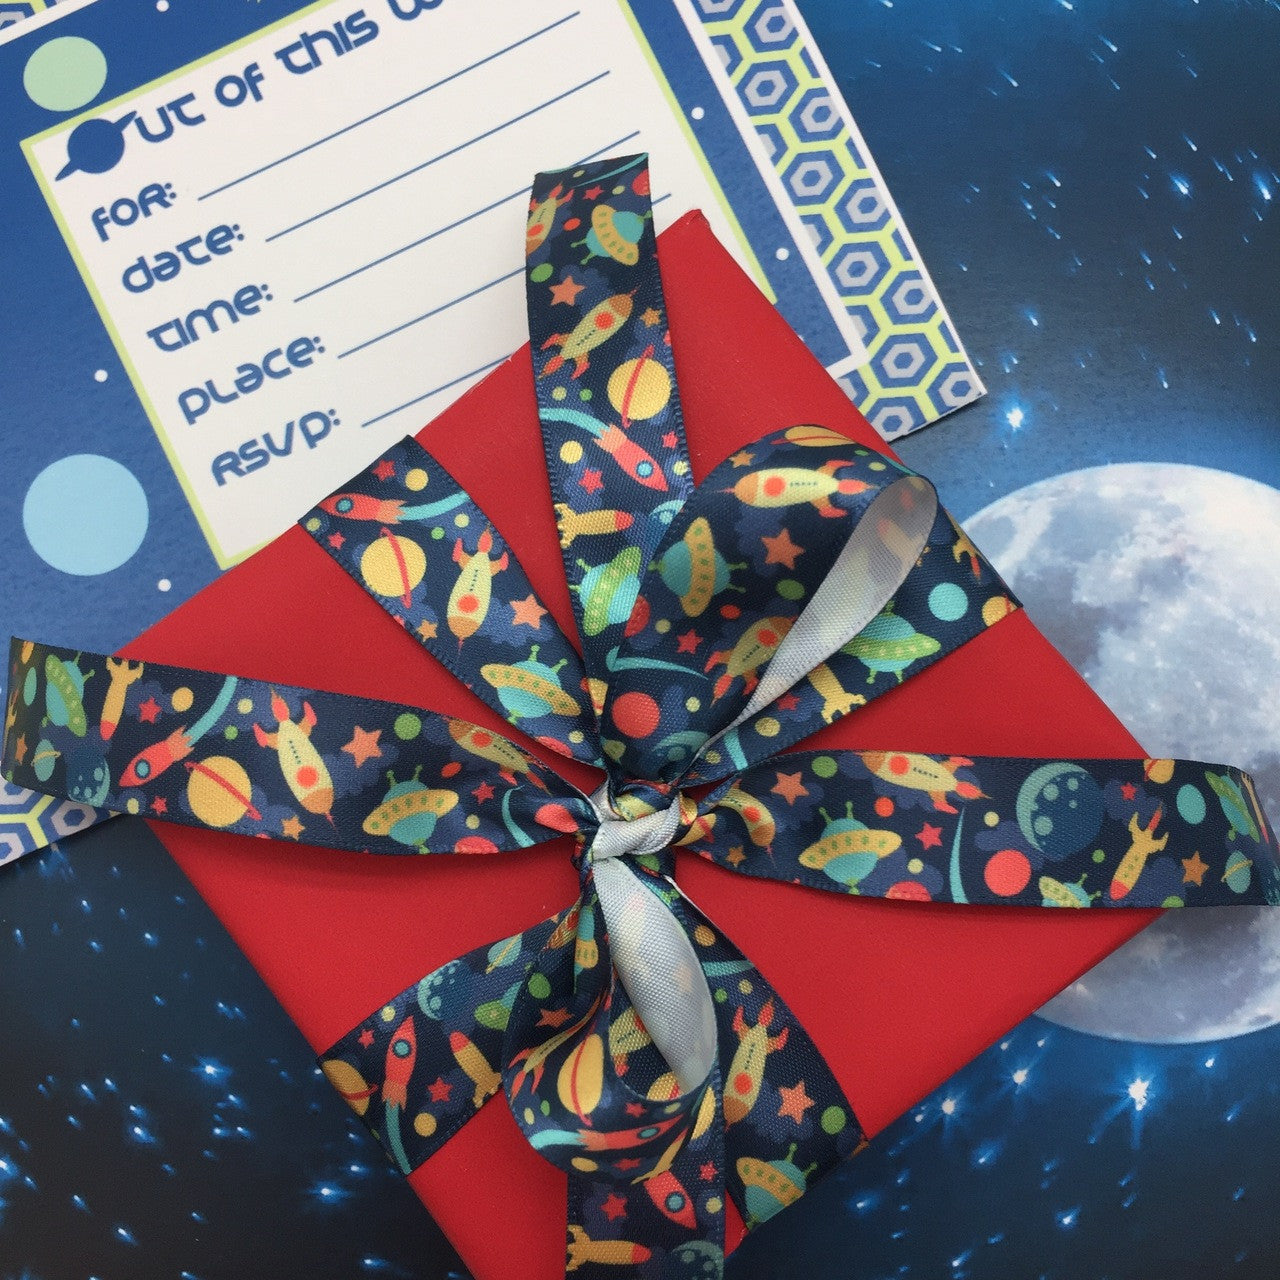 Our space ship ribbon is out of this world!  Be sure to have it on hand for Space theme birthday parties!